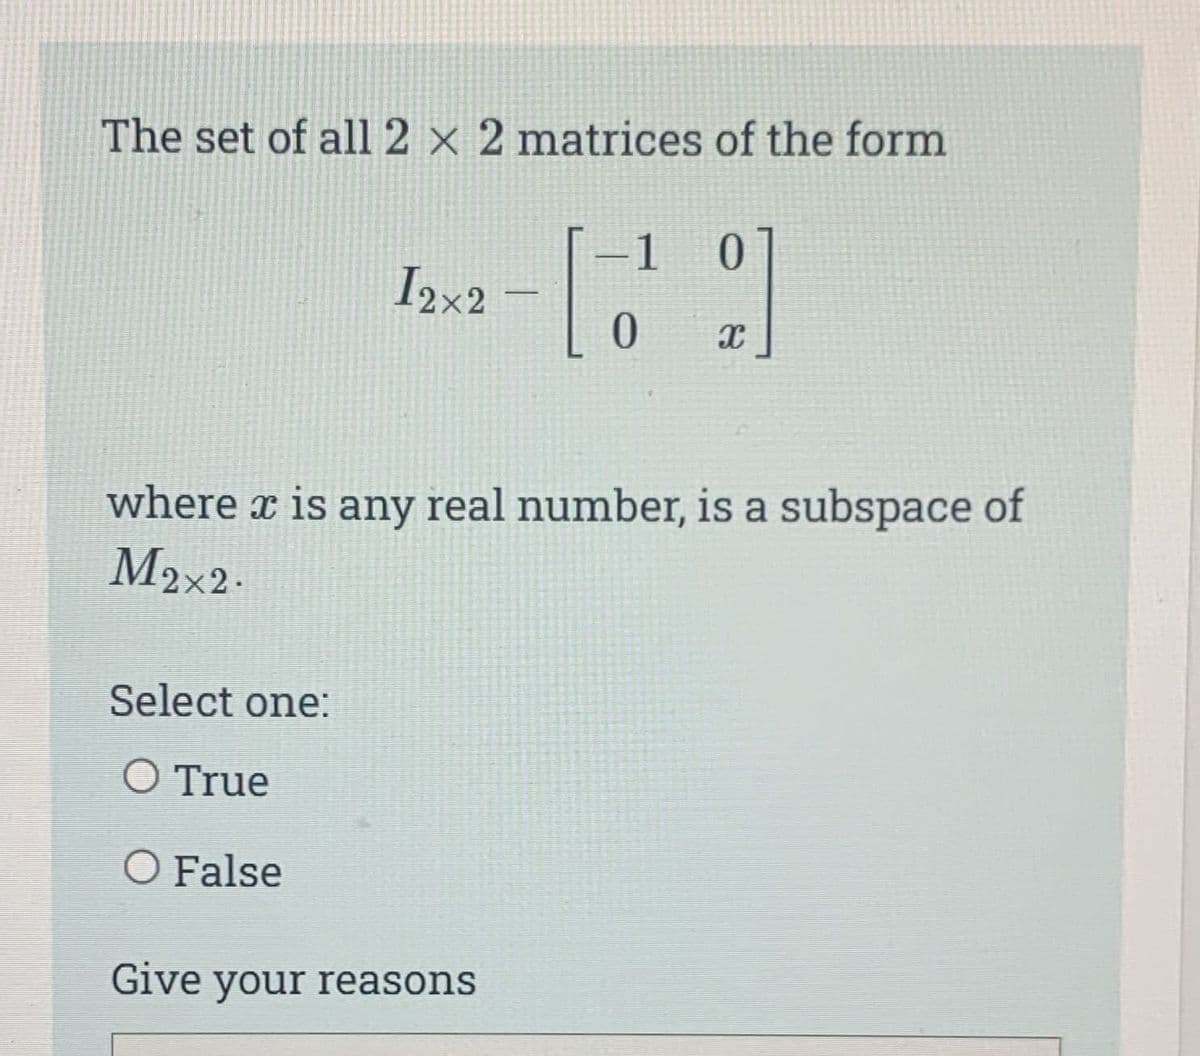 The set of all 2 x 2 matrices of the form
2]
I2x2
Select one:
O True
O False
where x is any real number, is a subspace of
M2x2.
– 1
0
Give your reasons